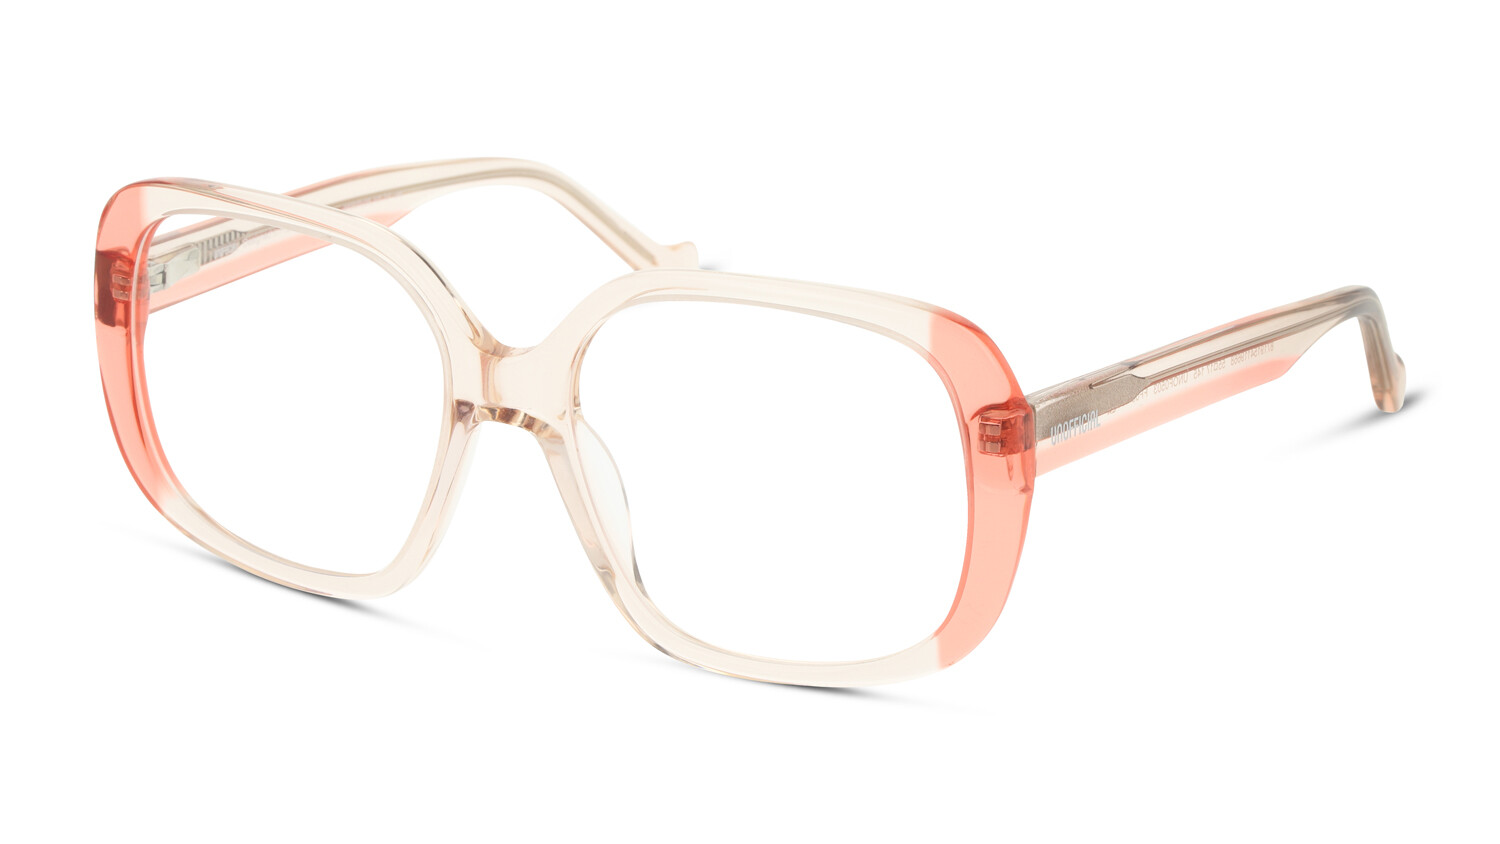 Angle_Left01 UNOFFICIAL UNOF0503 FF00 Brille Beige, Rosa